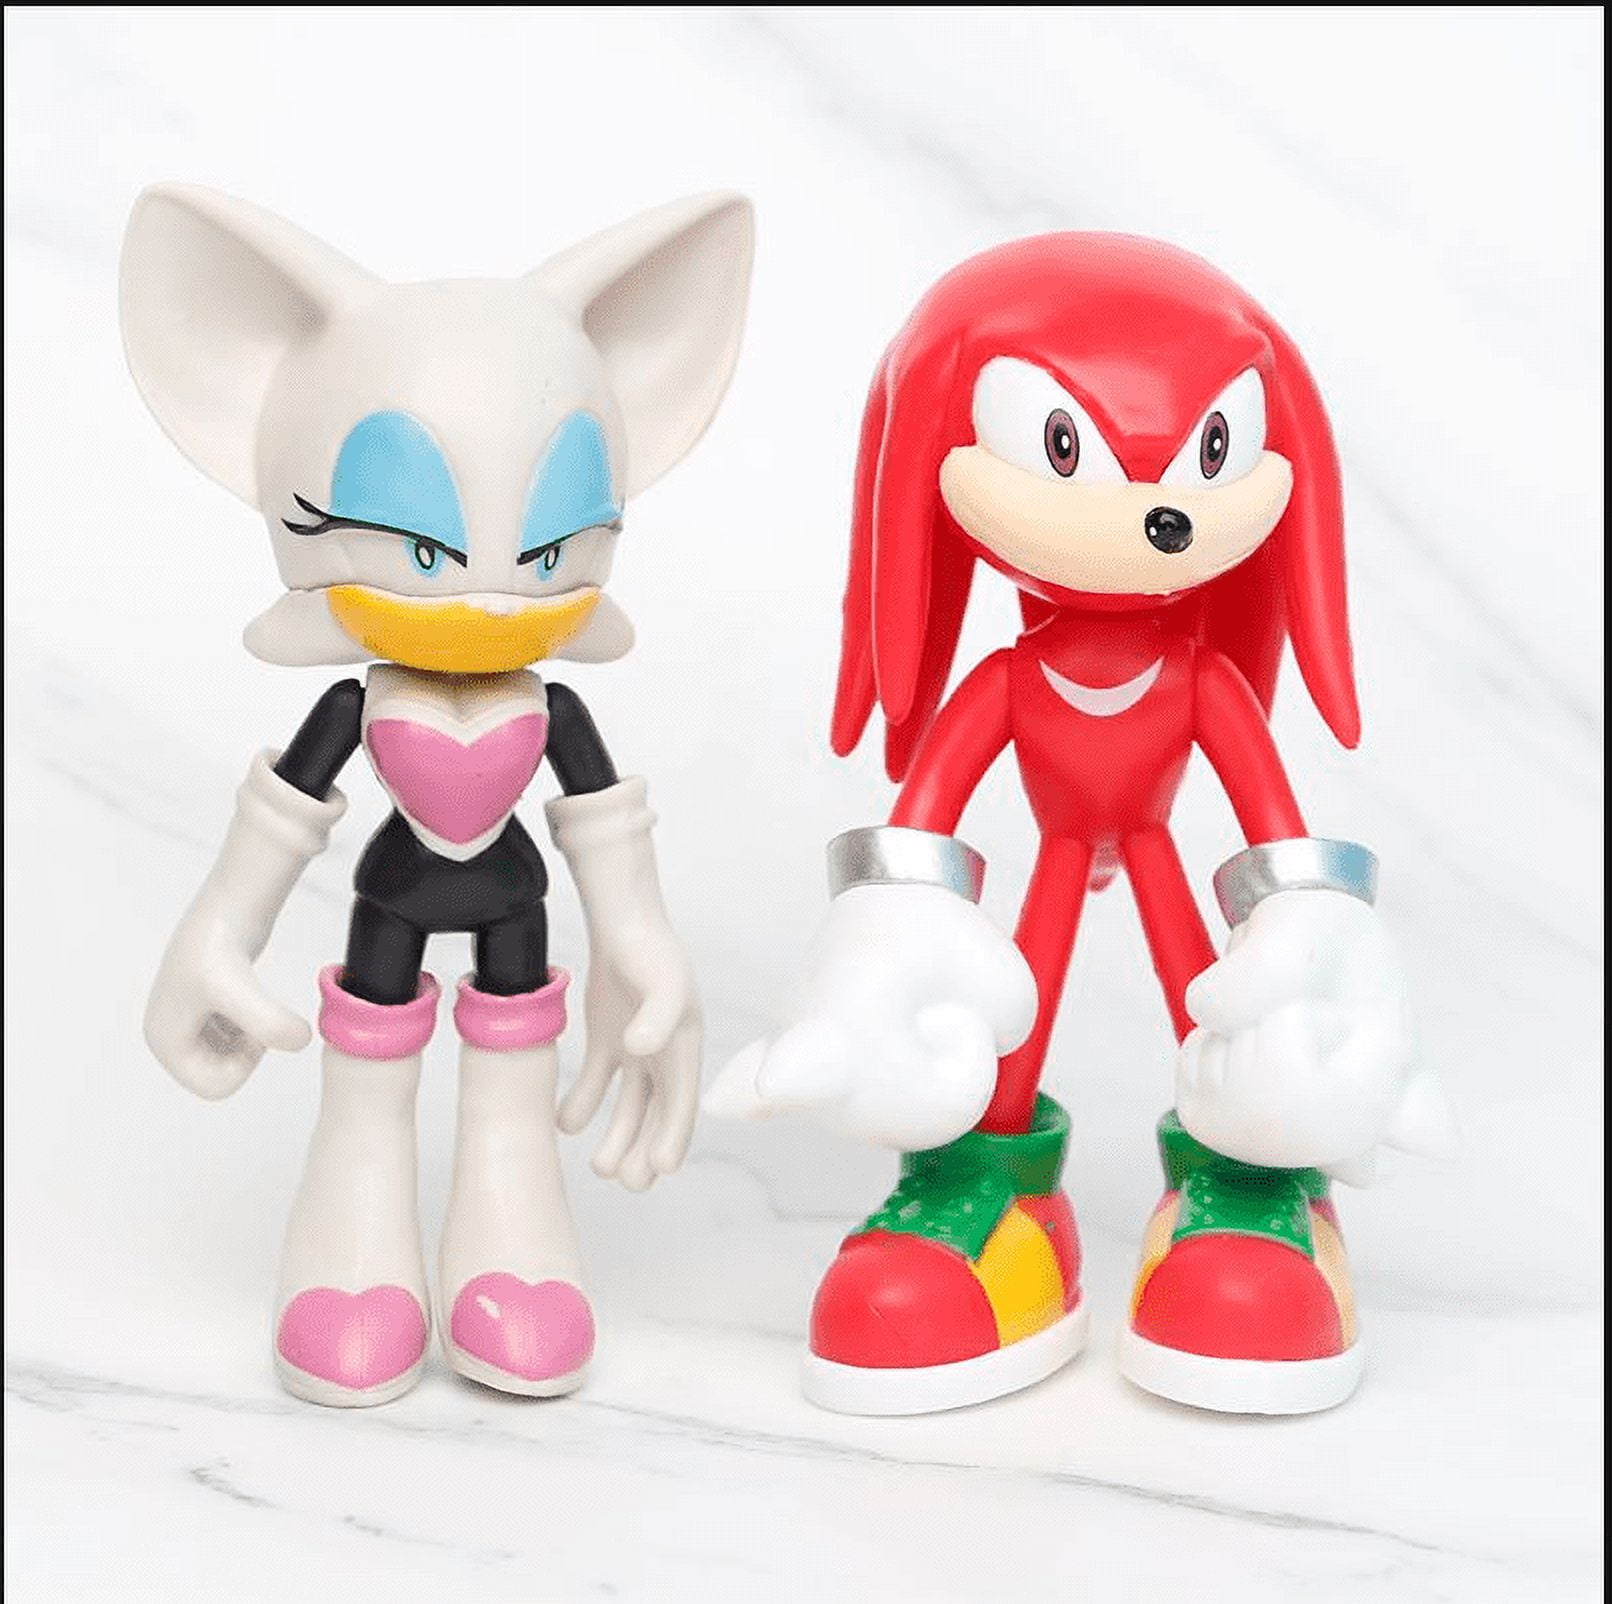 Funnytoys 6PCS/Set Sonic the Hedgehog Action Figures Toys Sonic Knuckles  Tails Amy Metal Sonic Super Sonic PVC Model Toy Great Figurine Gift, 5cm-7cm